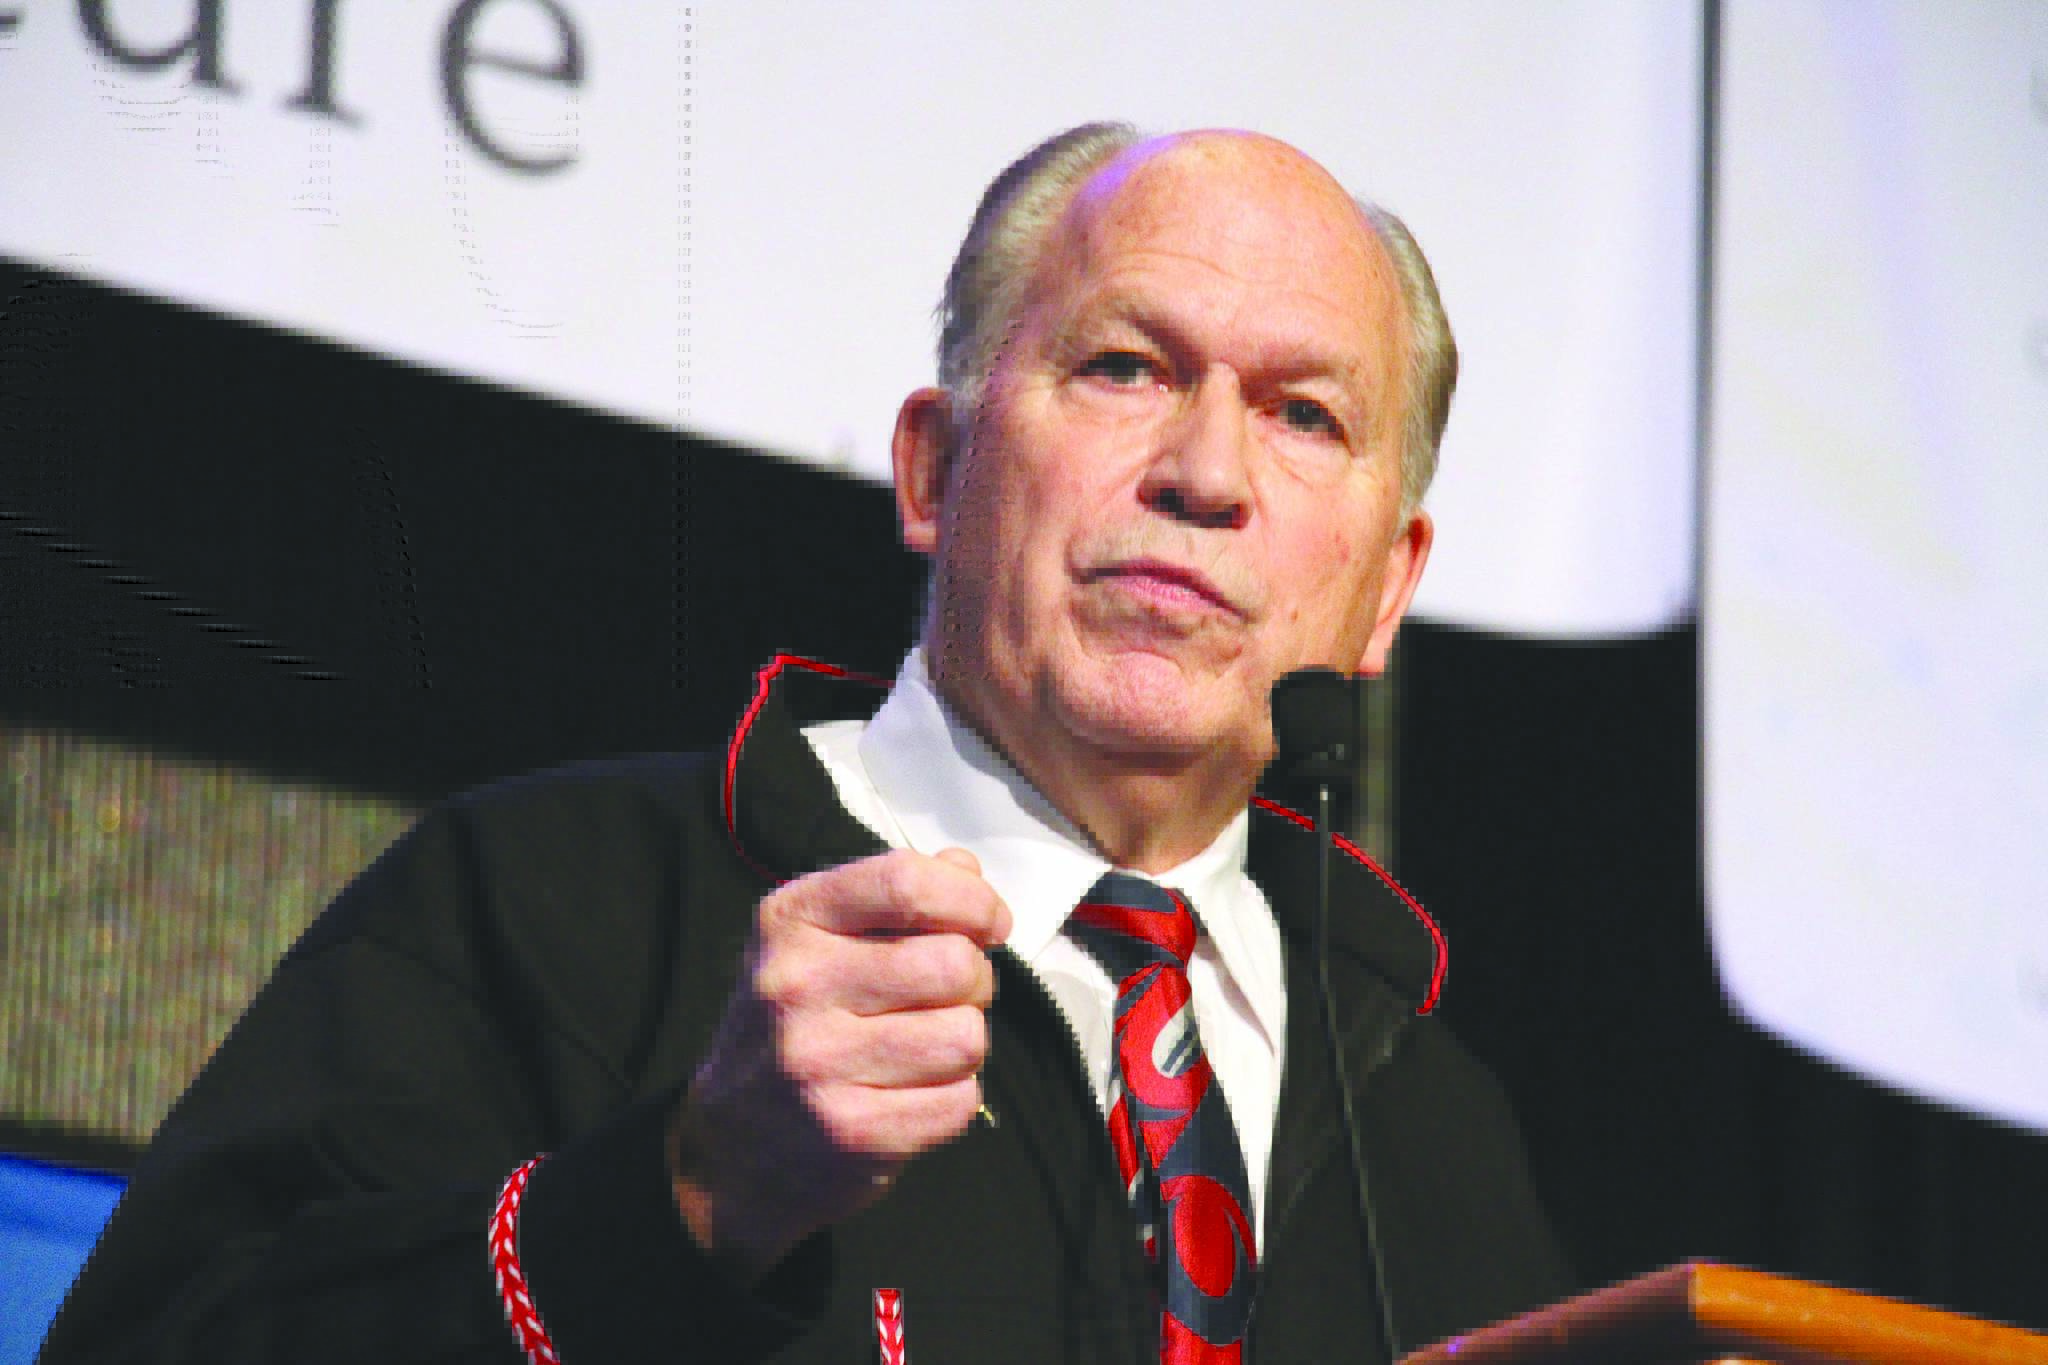 FILE - In this Oct. 18, 2018, file photo, then-Alaska Gov. Bill Walker addresses delegates at the annual Alaska Federation of Natives conference in Anchorage, Alaska. Former Alaska Gov. Walker, who was one of the country’s few politically unaffiliated governors, plans to discuss with students bridging the political divide during an upcoming, on-campus residency at Harvard University. (AP Photo/Mark Thiessen, File)